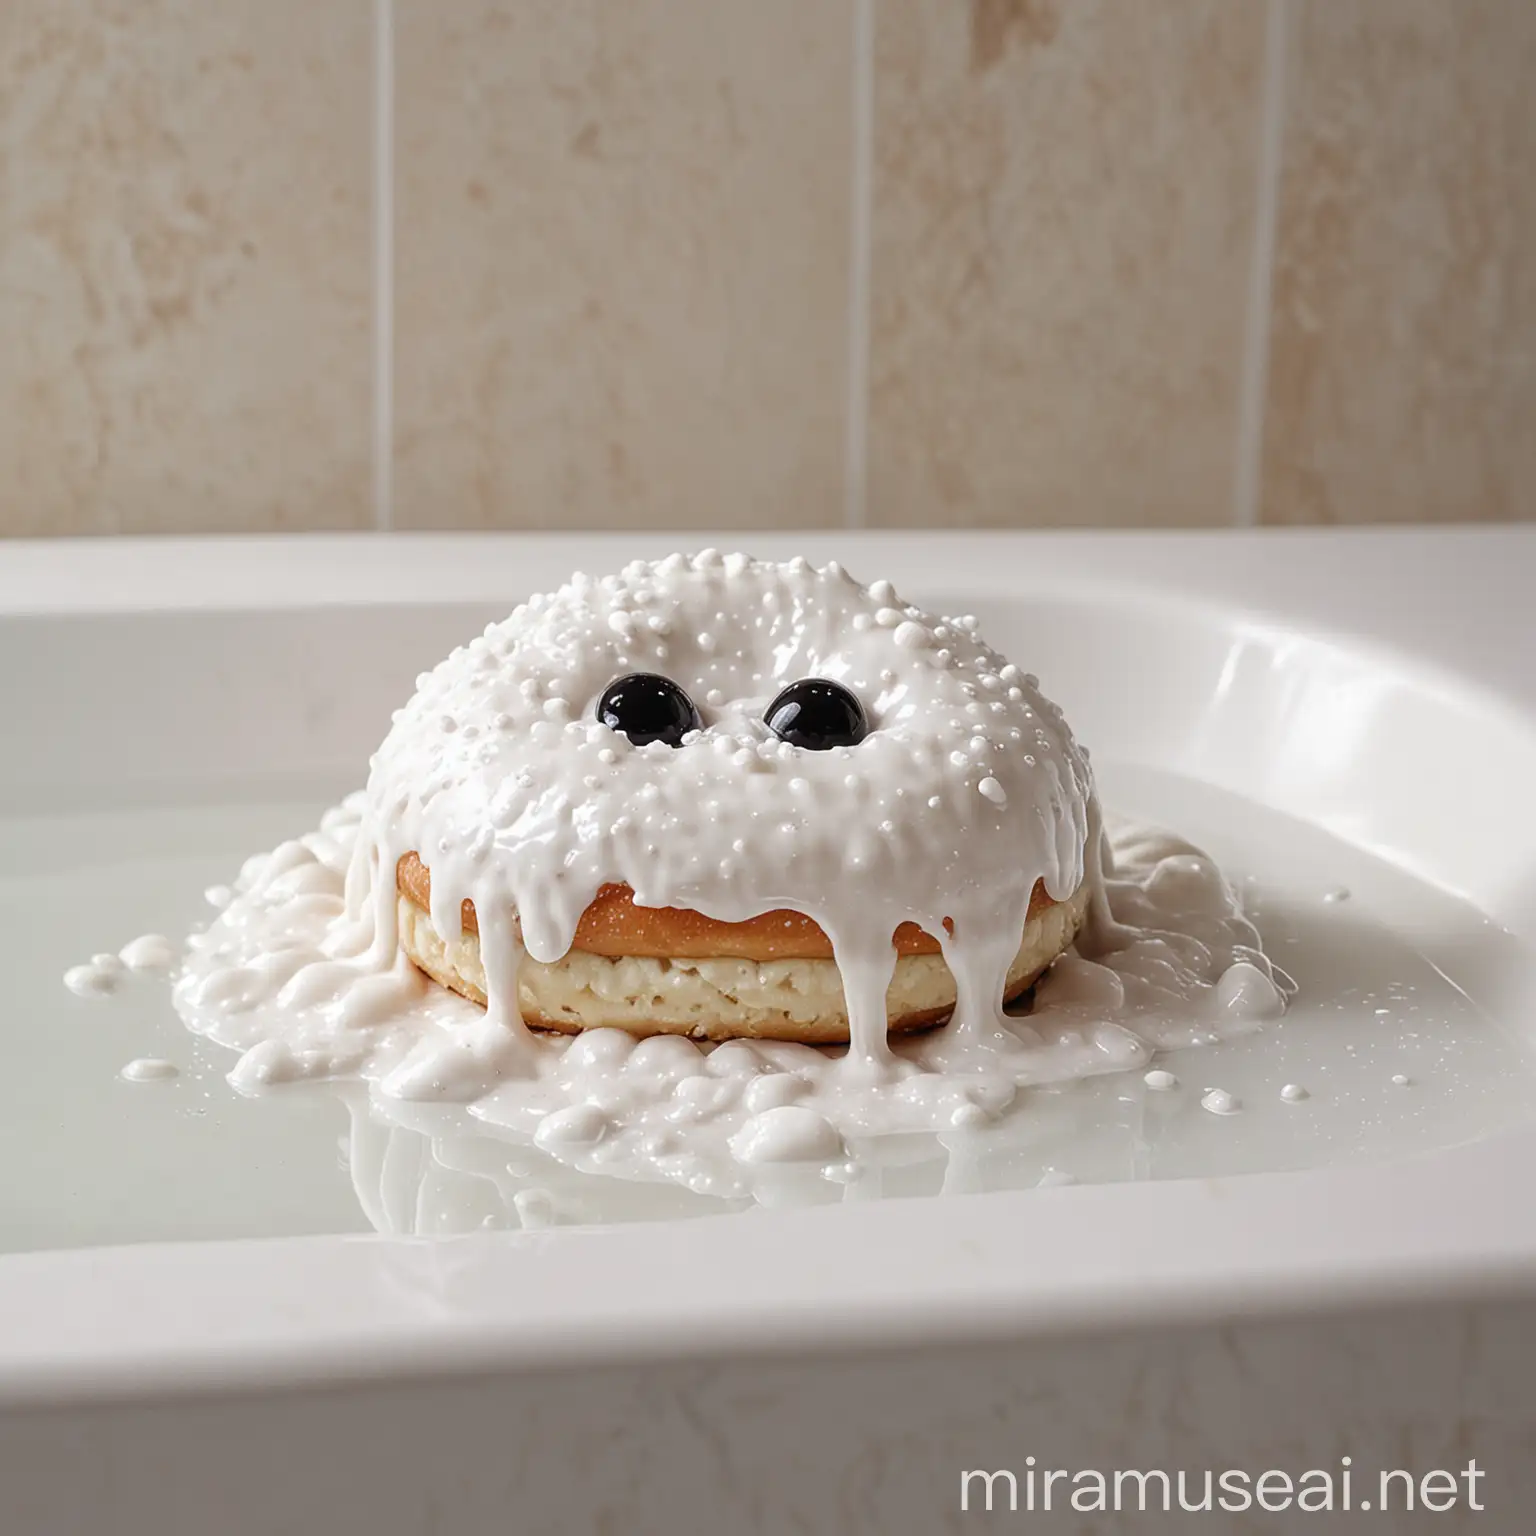 dougnut with white slime on its top, tempting color, on bathroom